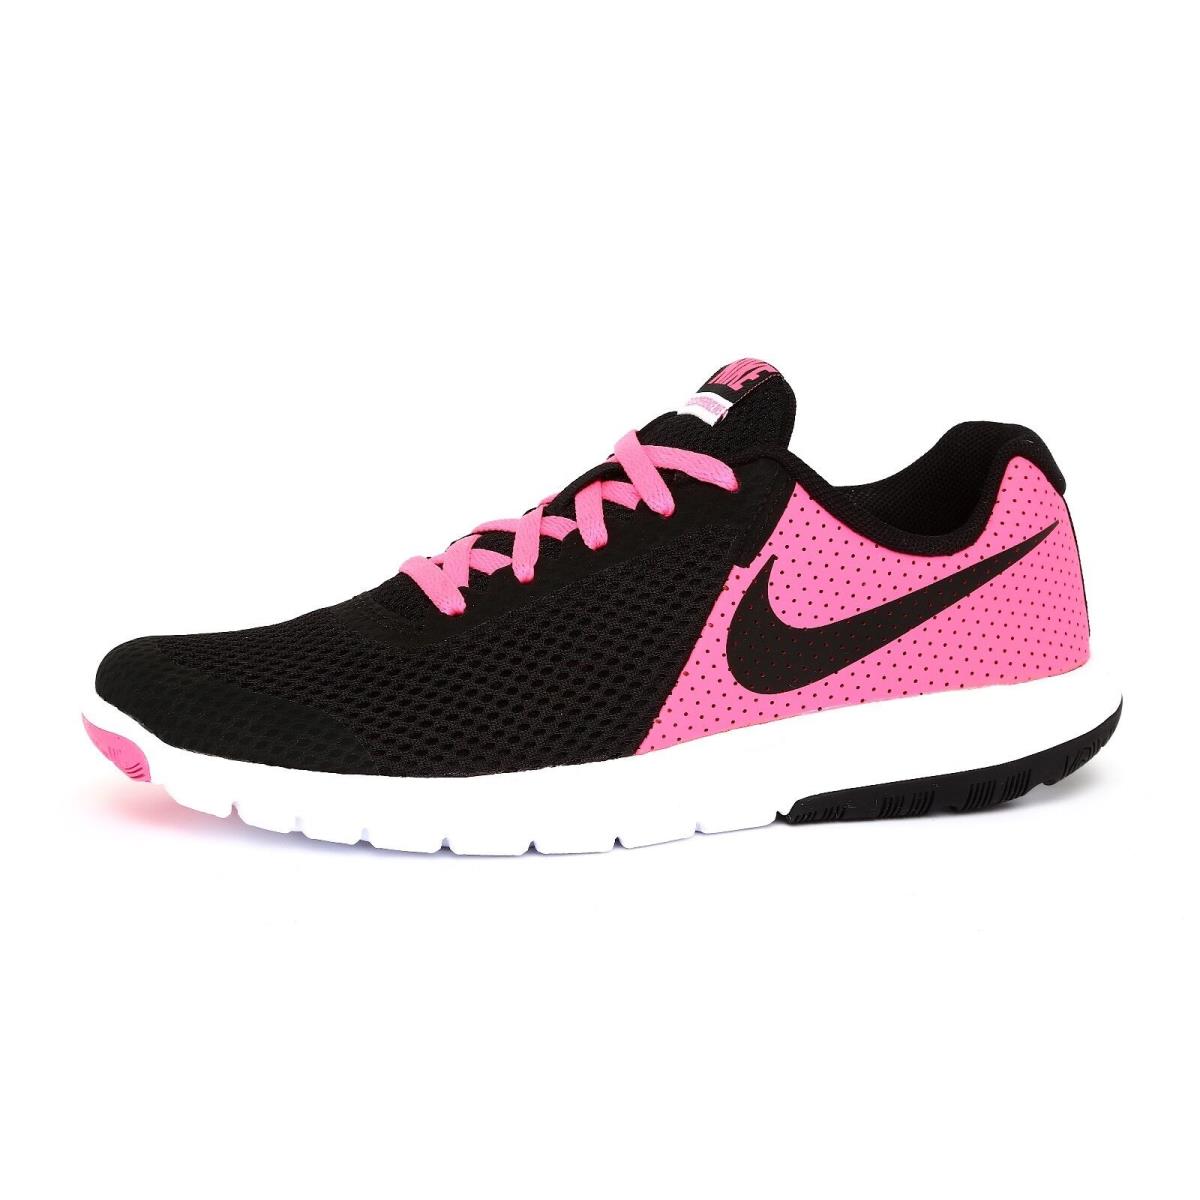 Nike Flex Experience Girls Pink Black Running Shoes N4458 Youth Size 5.5 Y - Multicolor